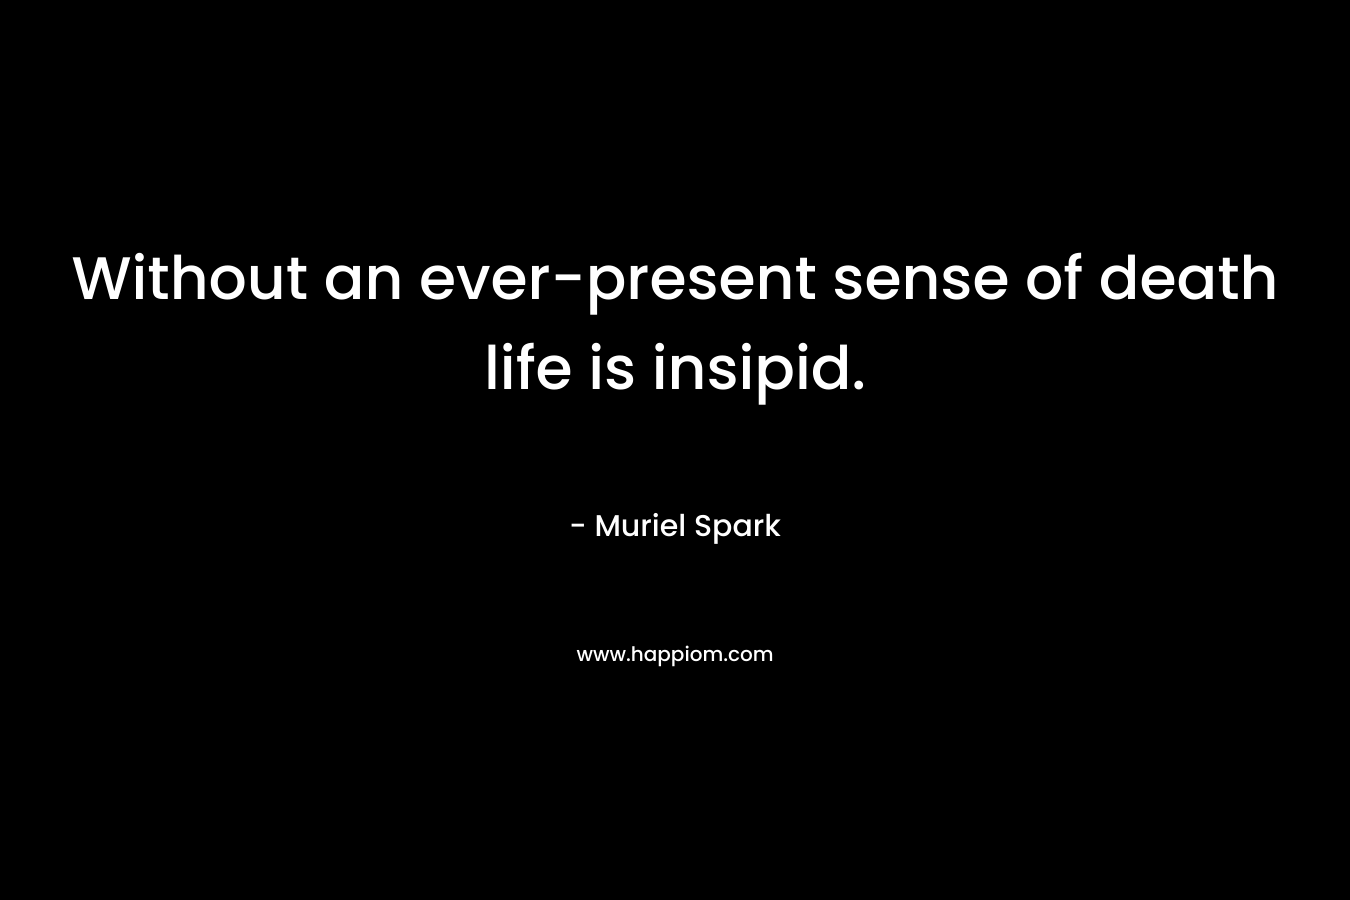 Without an ever-present sense of death life is insipid. – Muriel Spark